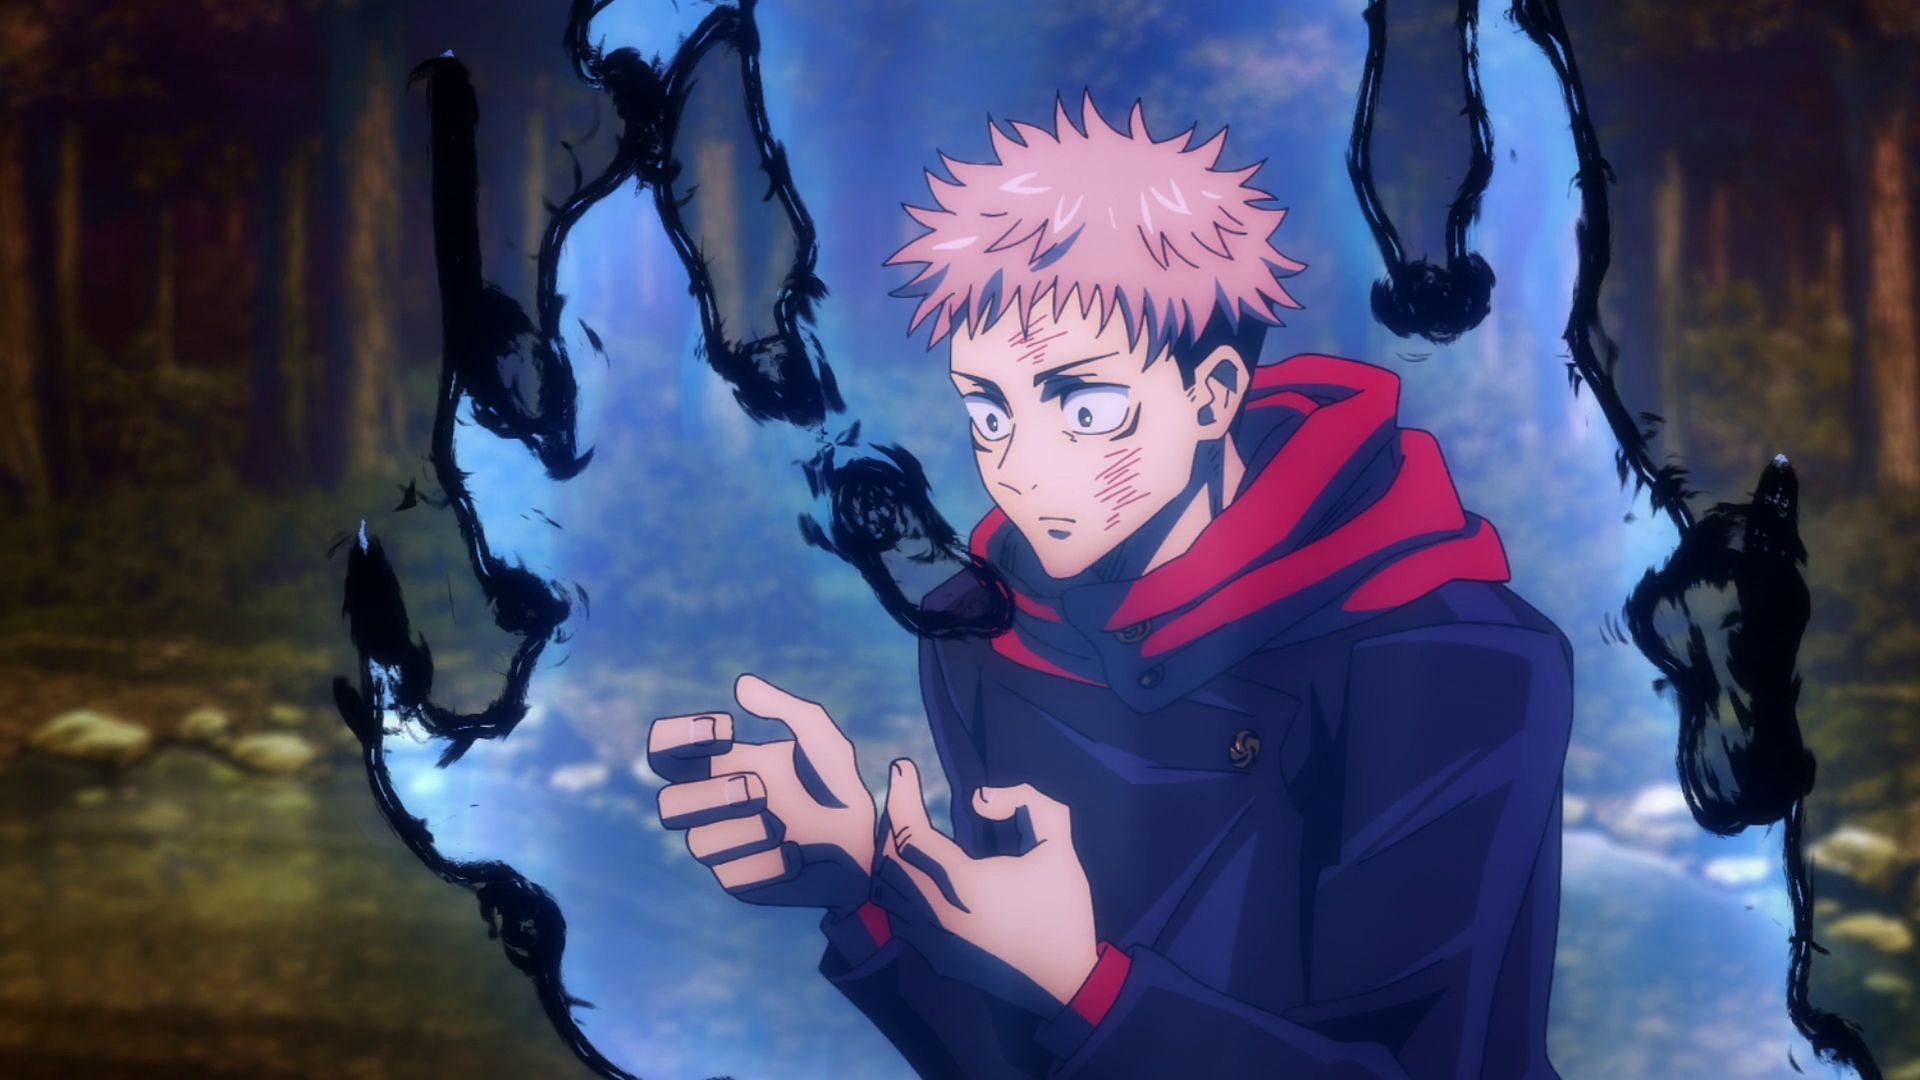 Jujutsu Kaisen chapter 239: Release date and time, what to expect, and more (Image via MAPPA Studios)